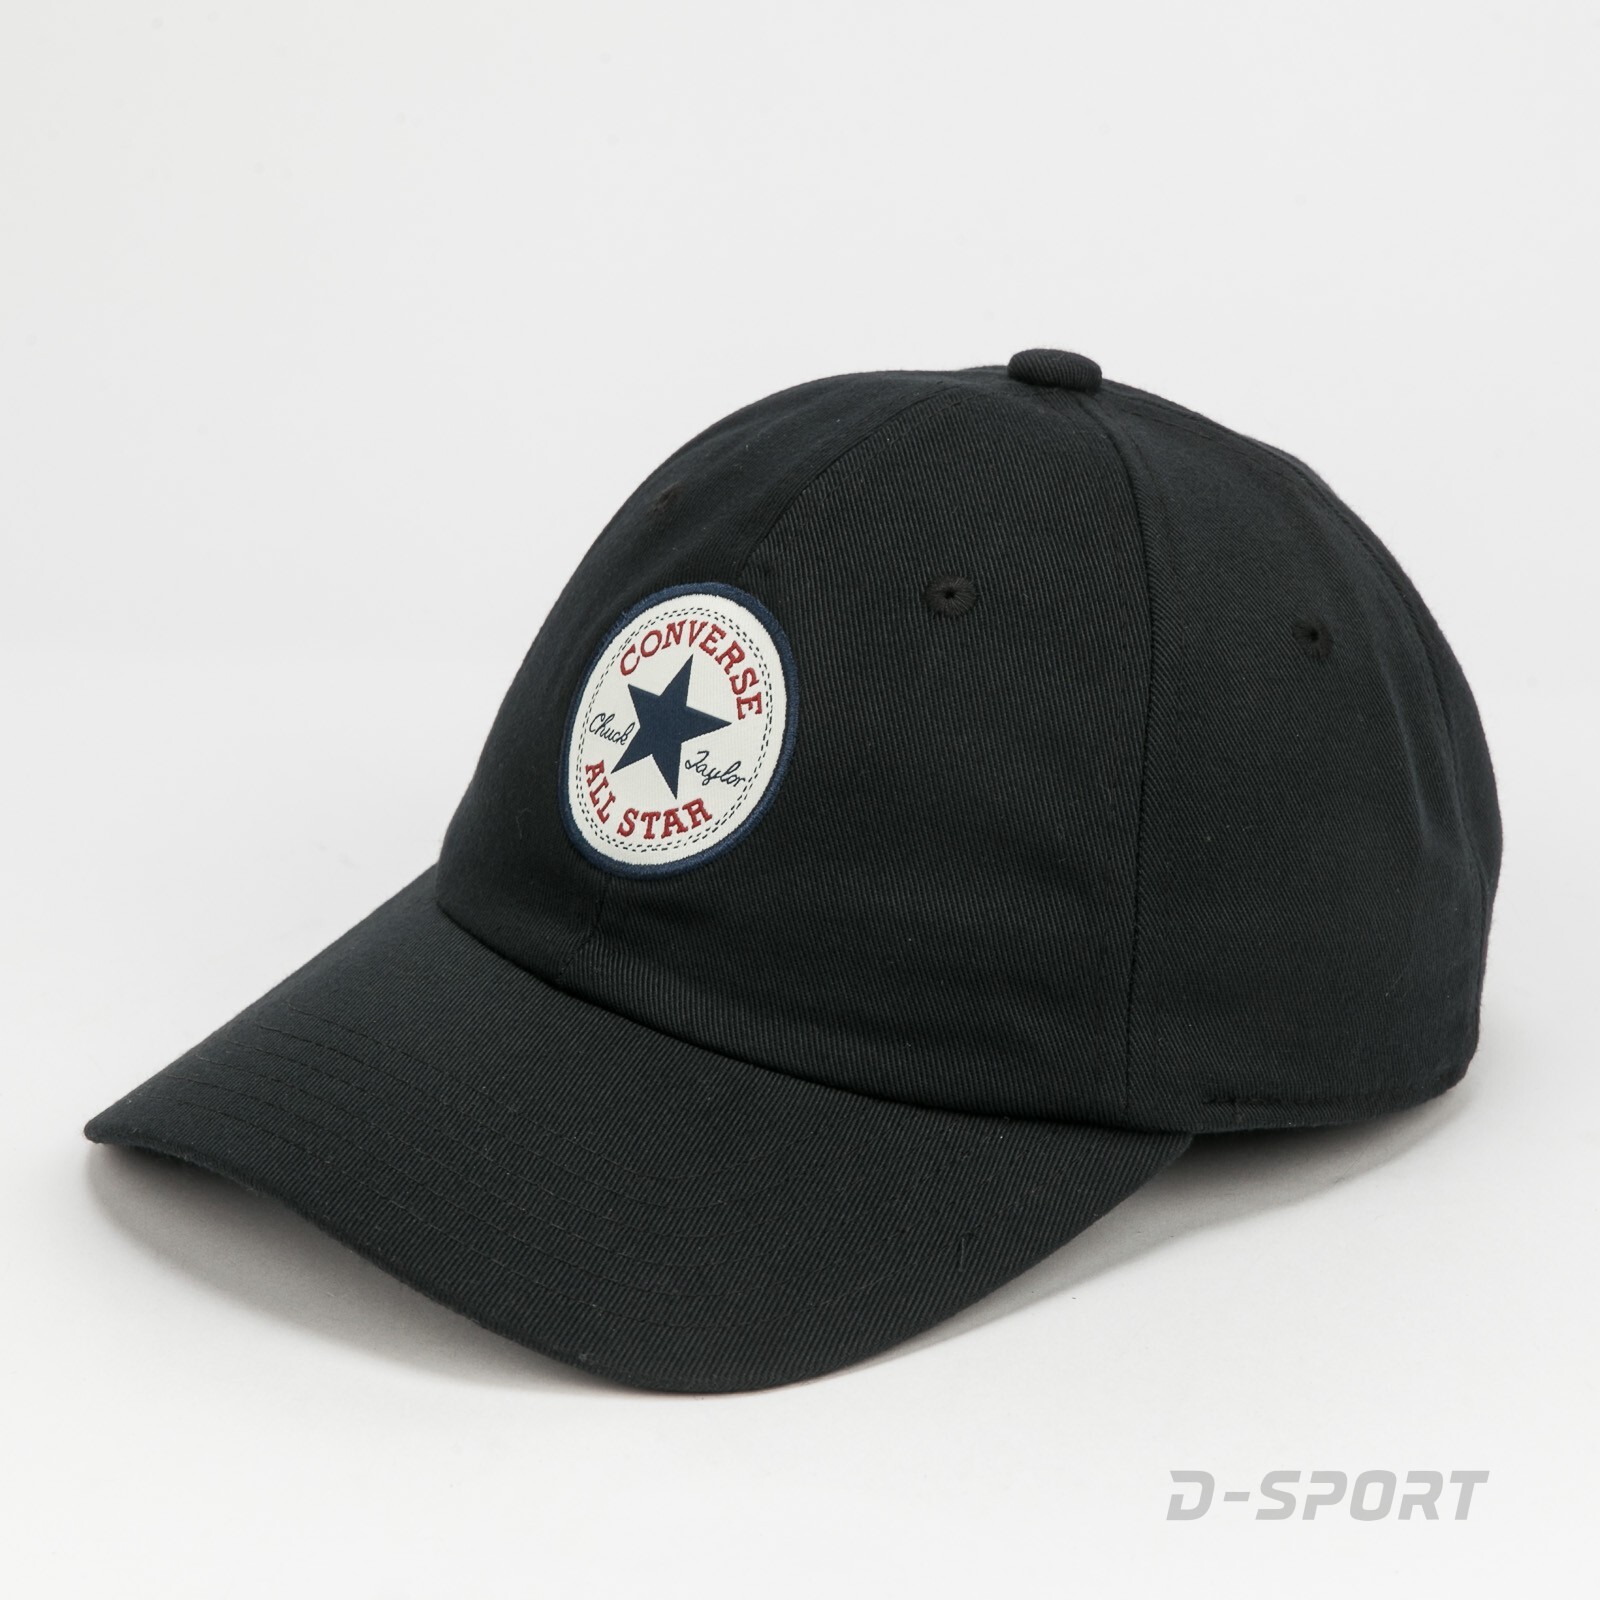 CHUCK TAYLOR ALL STAR PATCH BASEBALL HAT